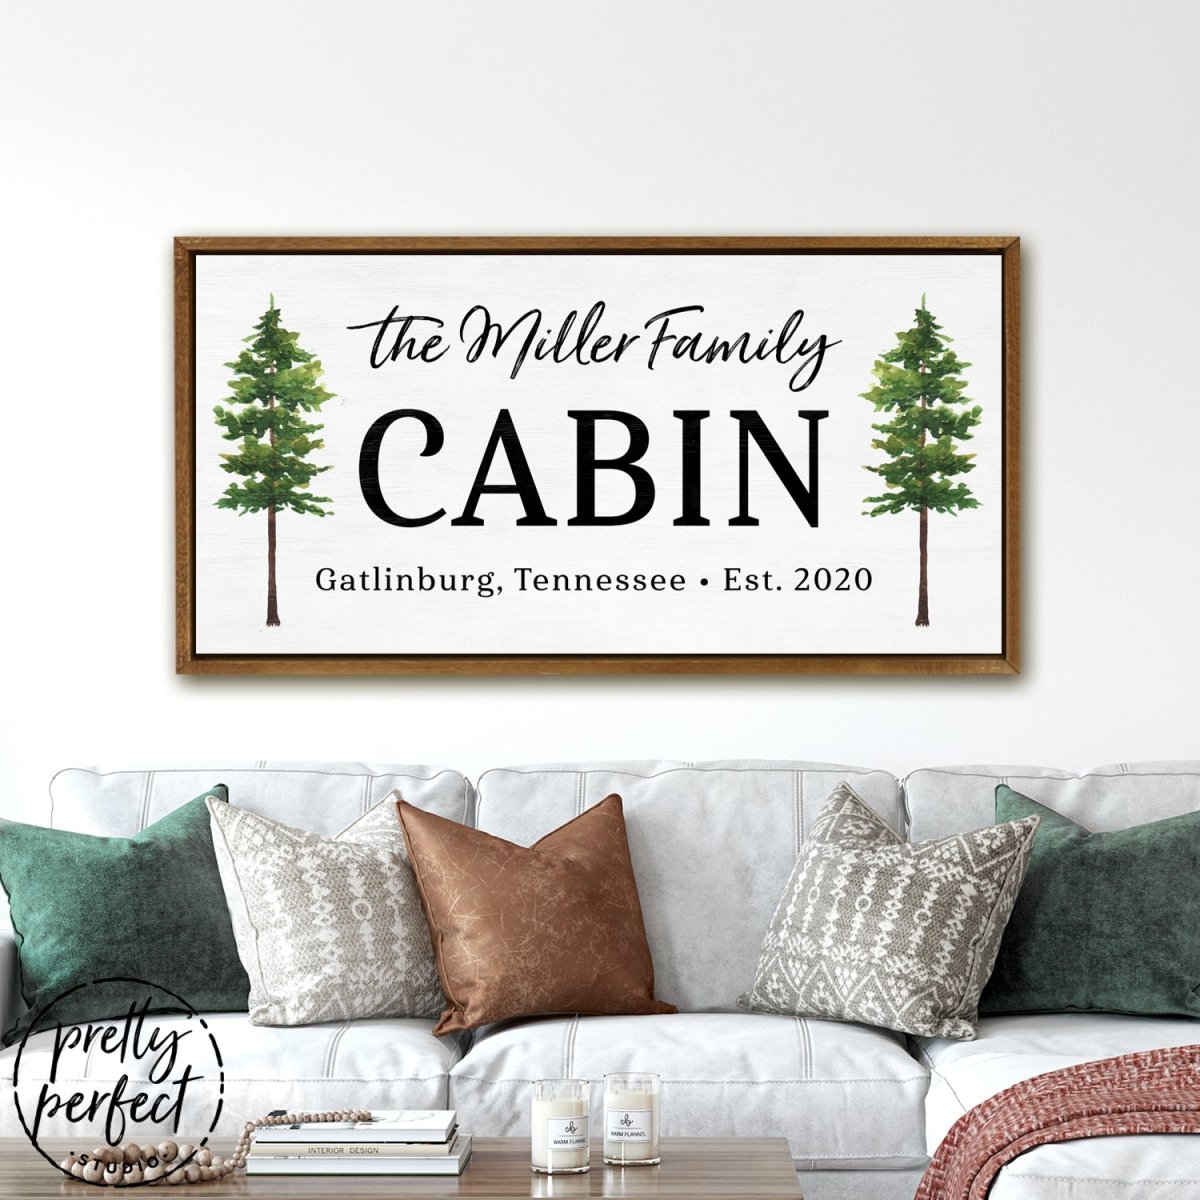 Personalized Family Cabin Sign Hanging Above Couch - Pretty Perfect Studio